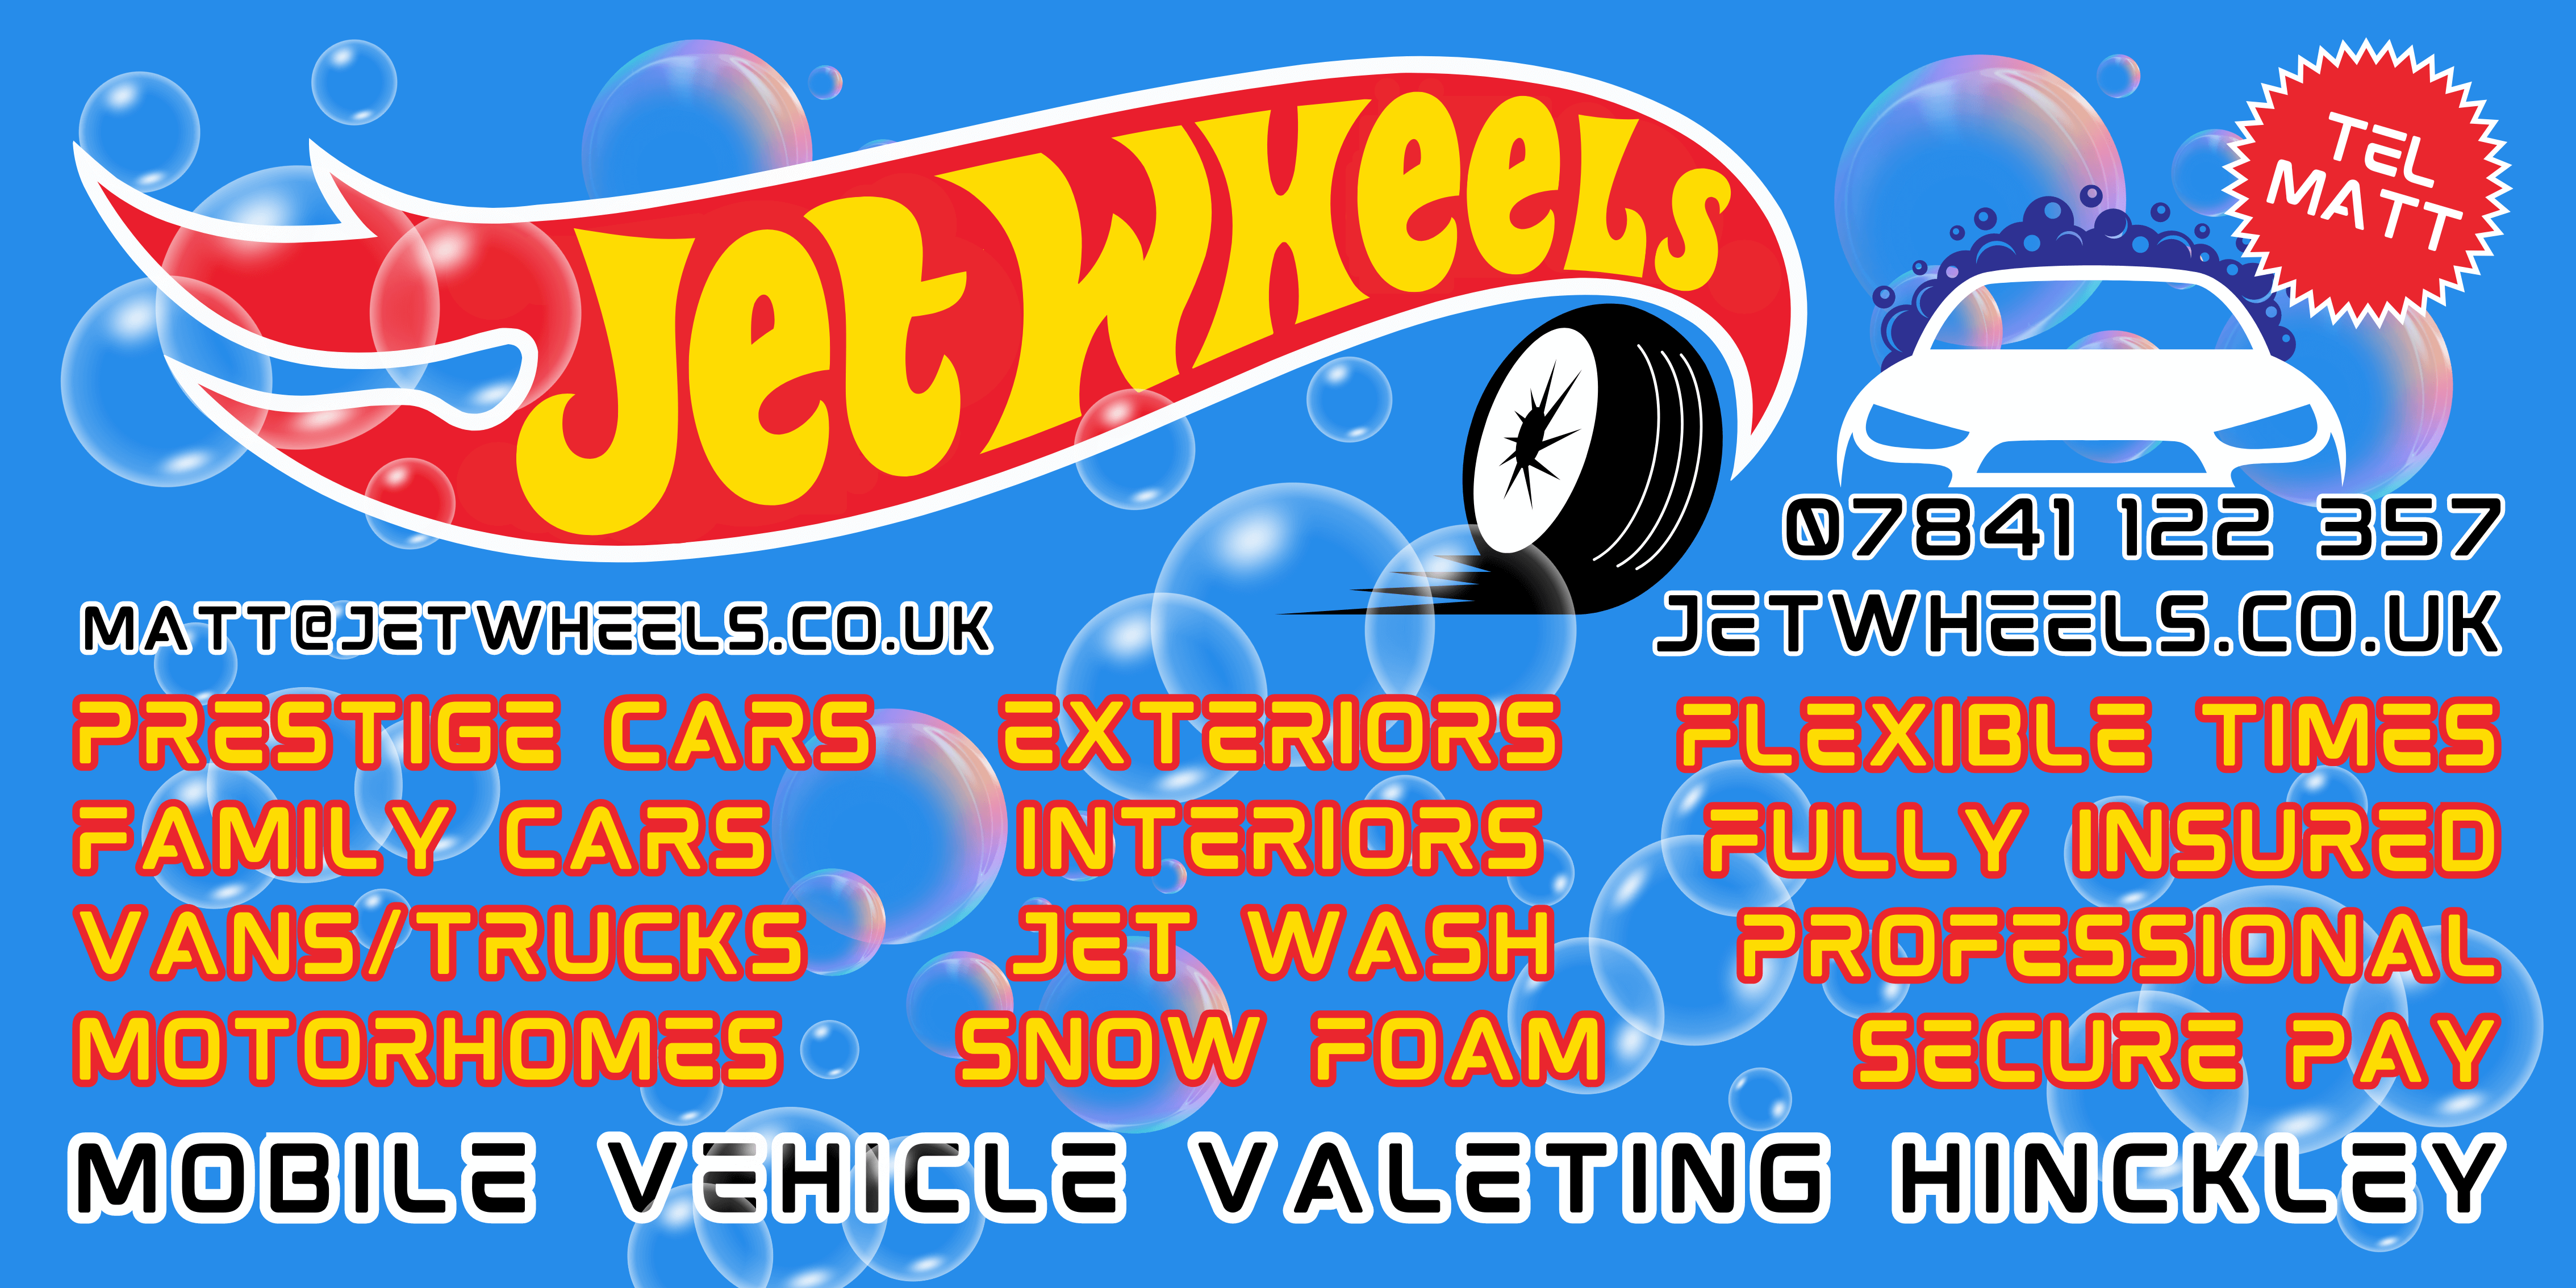 contact jet wheels mobile valeting hinckley